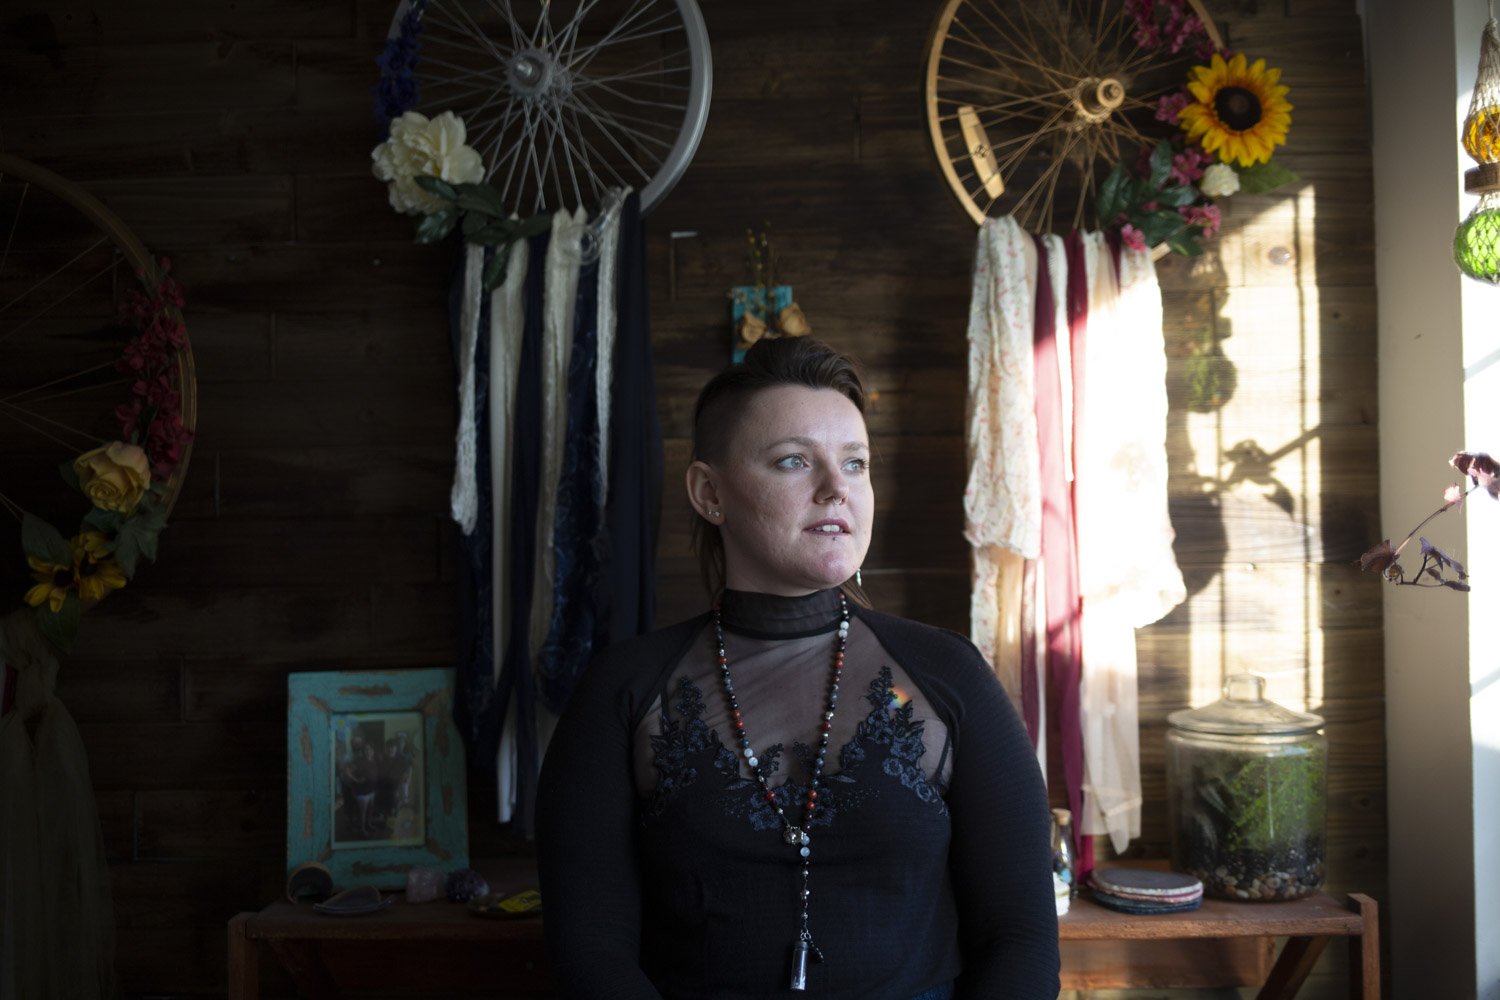  Kara Bookwalter, founding member of the Bloomington With Collective, poses in her home Feb. 26, 2022. "We are a group of friends and non-denominational witches,” she says of the group. “We are not a coven.”  